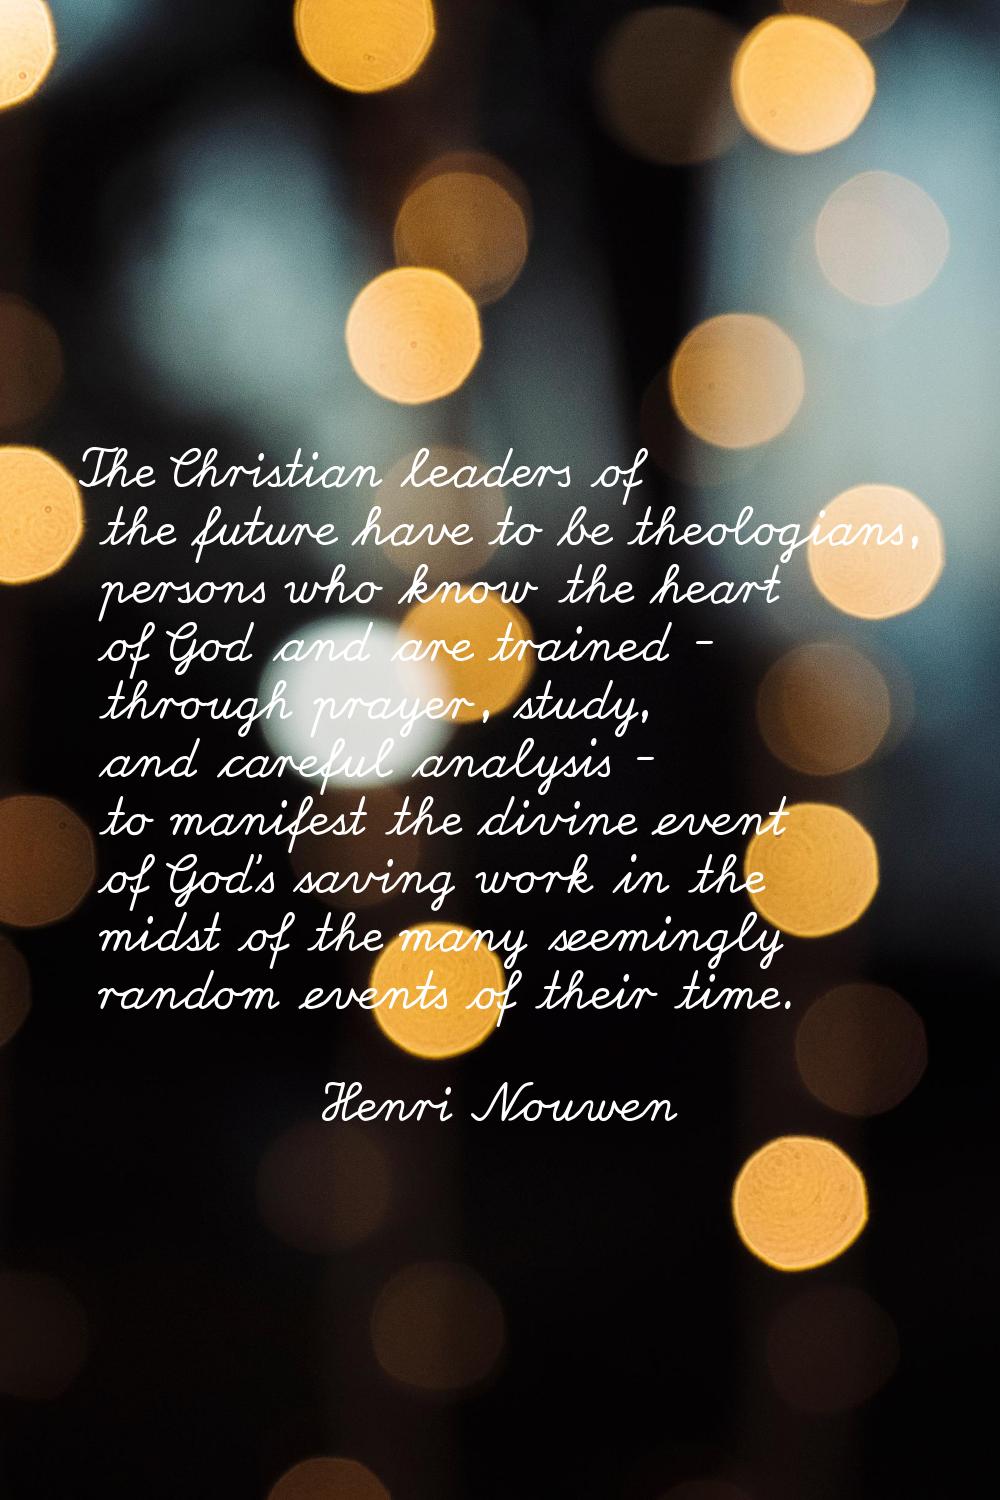 The Christian leaders of the future have to be theologians, persons who know the heart of God and a